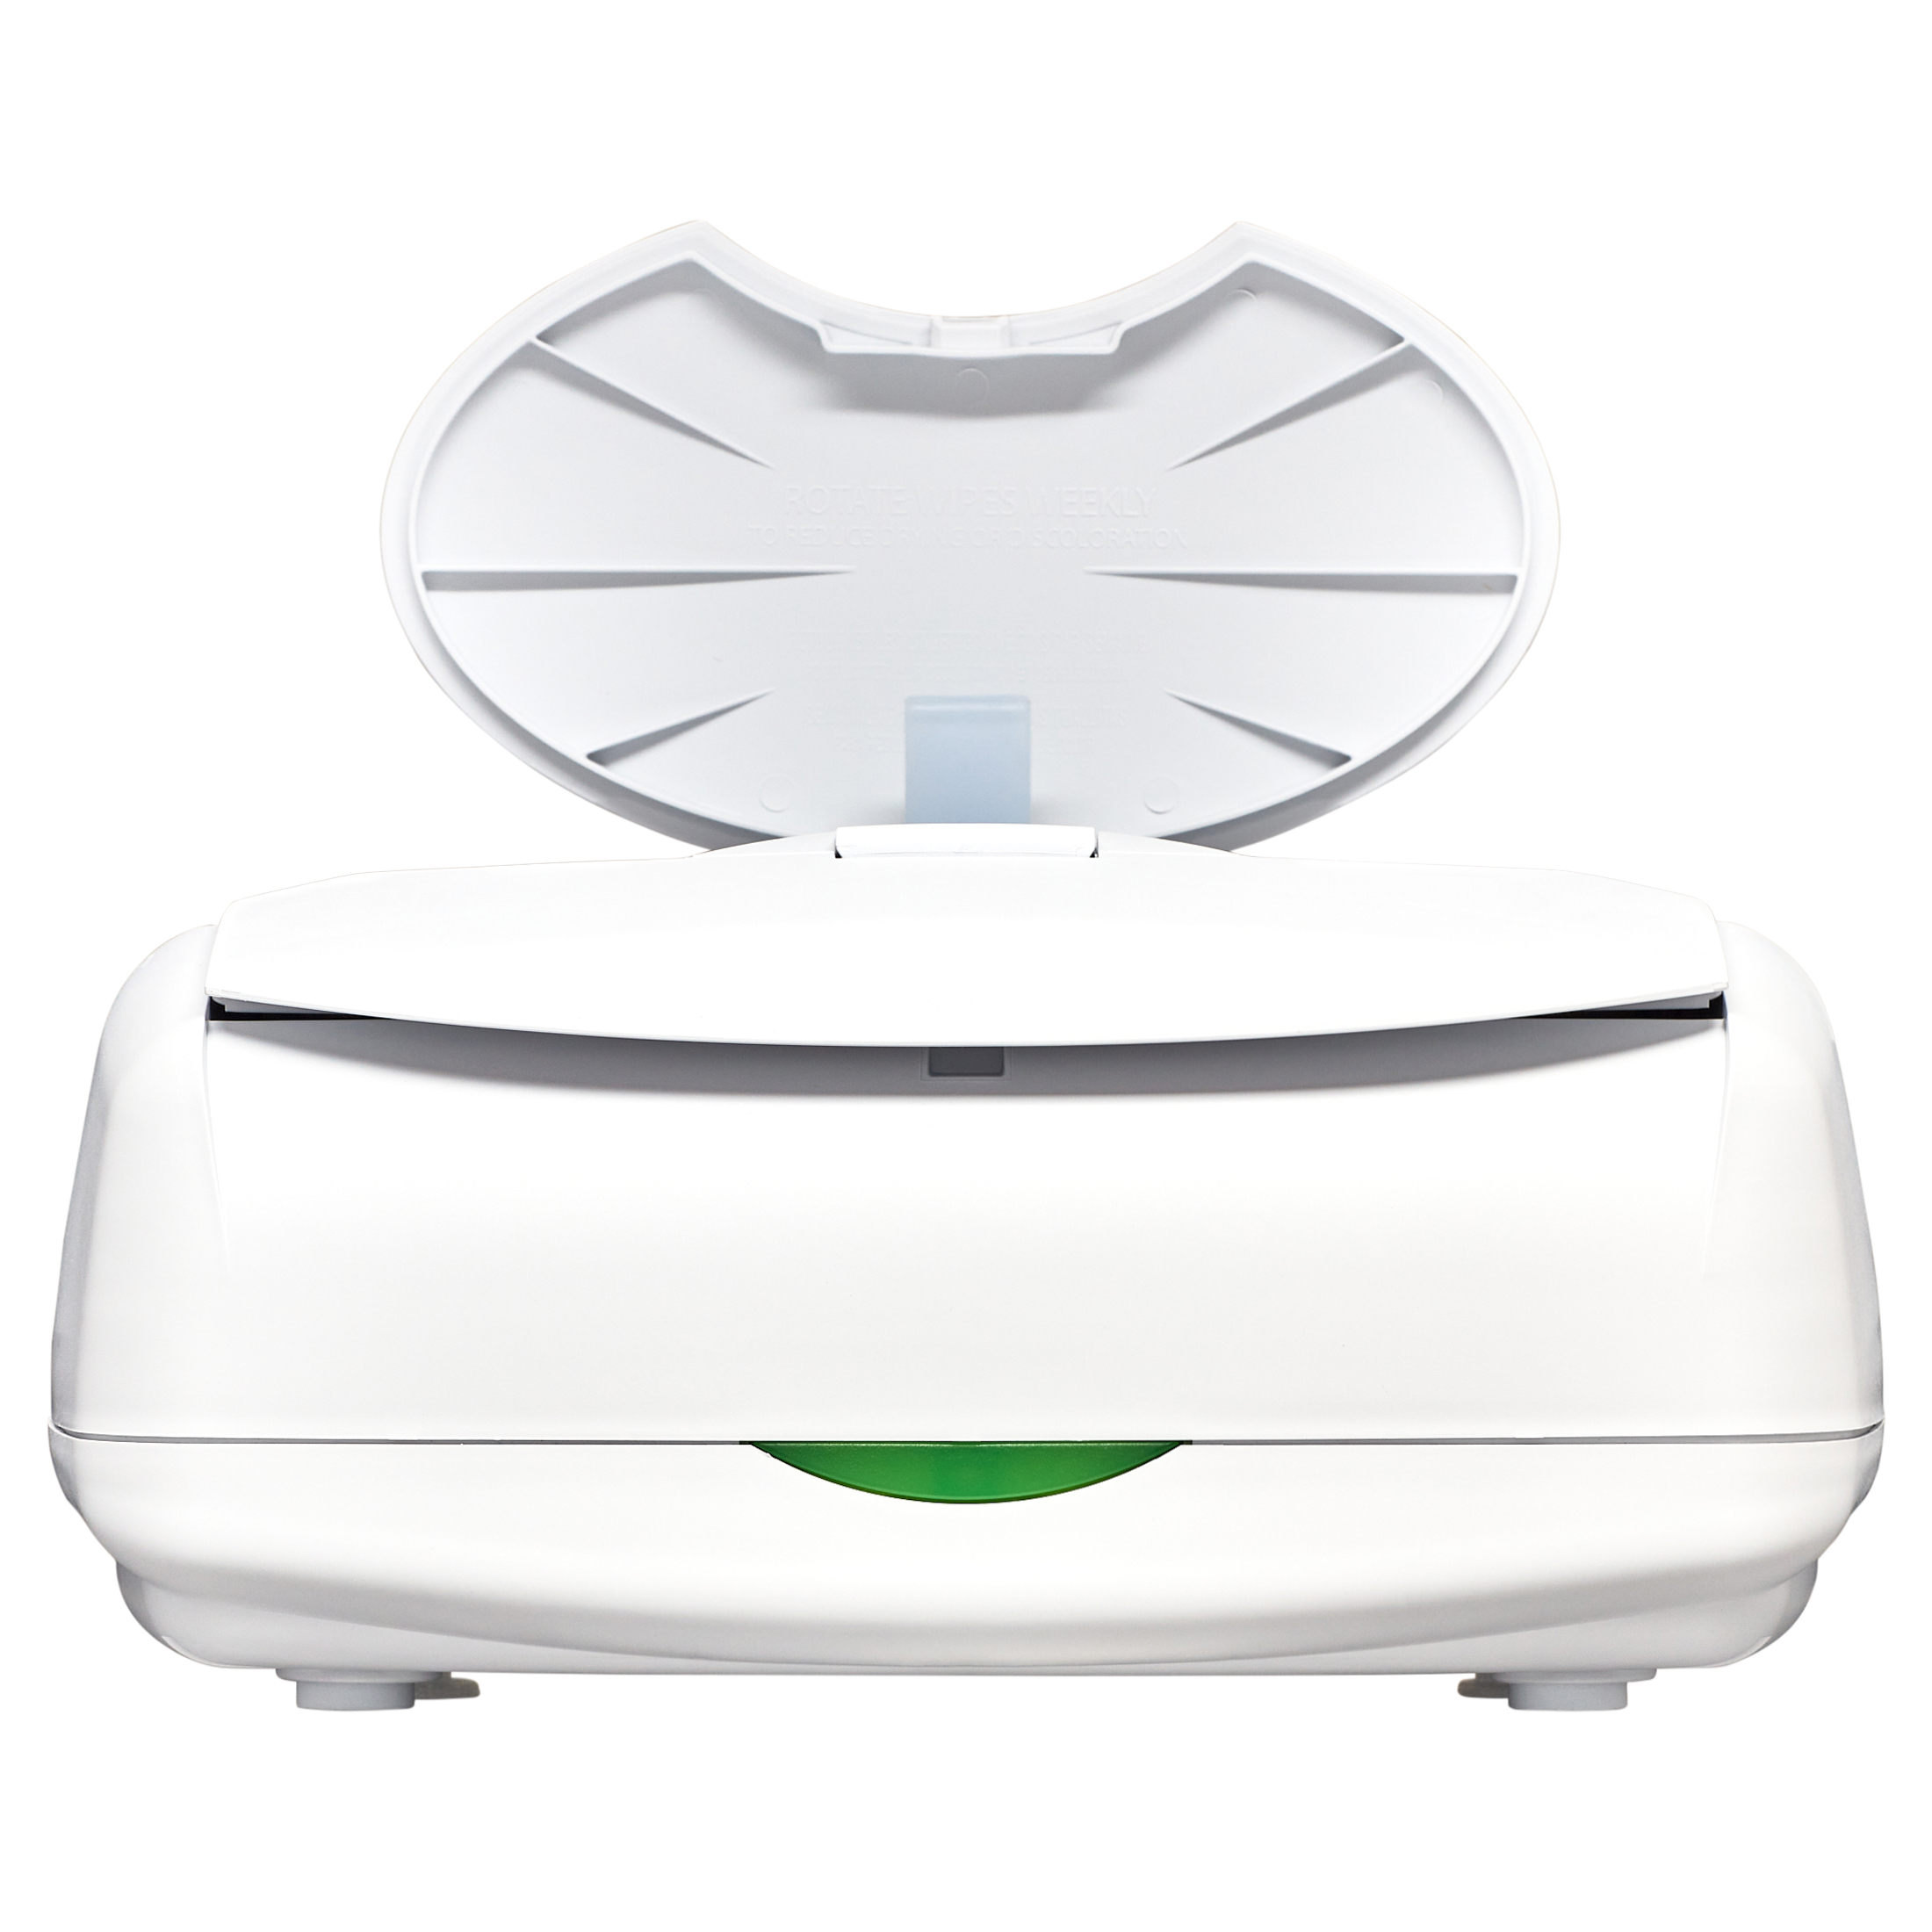 Prince Lionheart Ultimate Baby Wipe Warmer, White - image 4 of 9